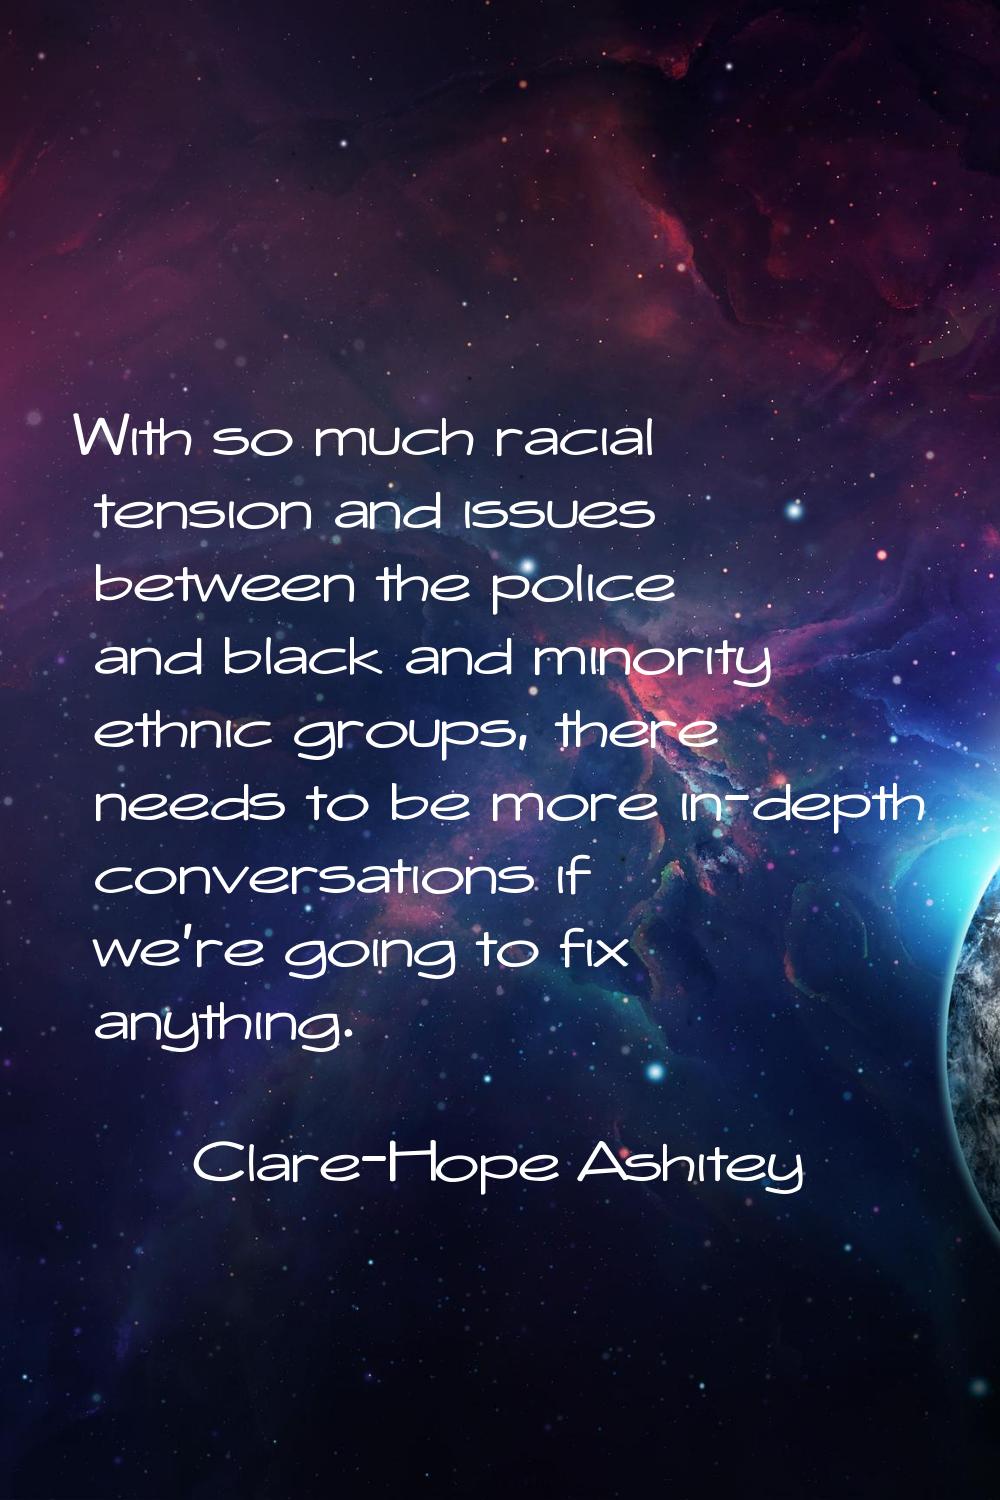 With so much racial tension and issues between the police and black and minority ethnic groups, the